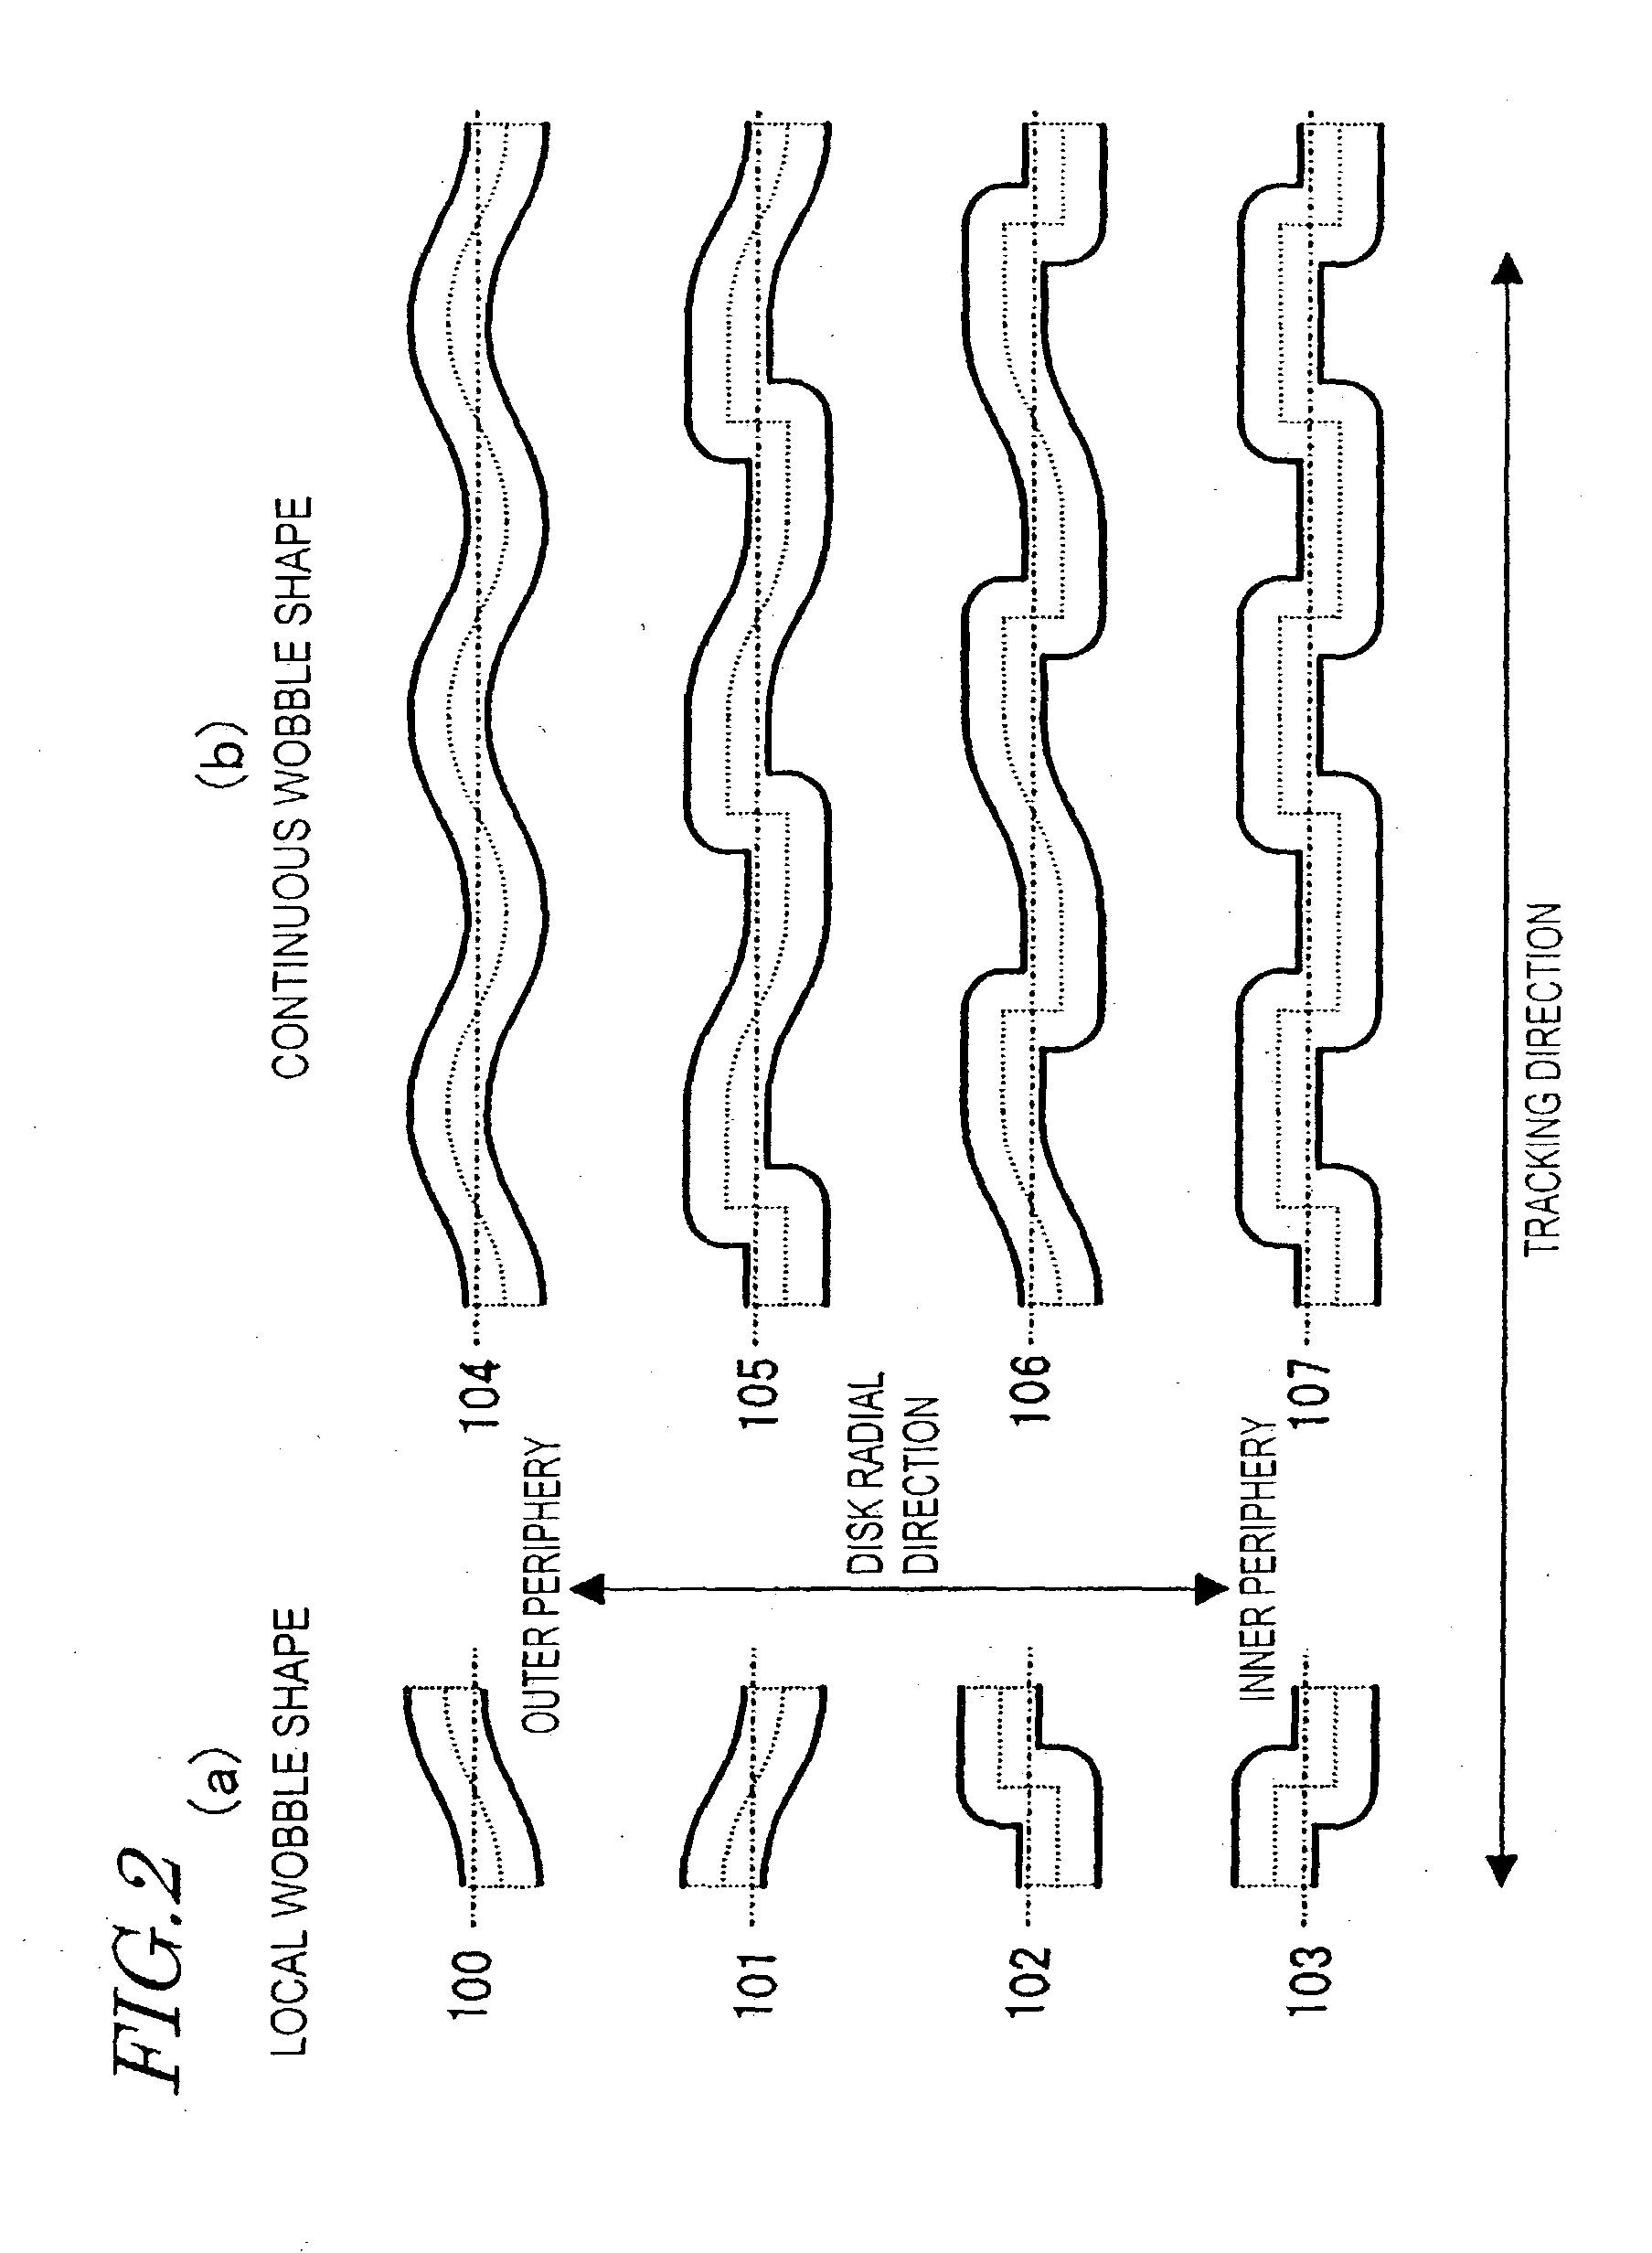 Optical disk having wobble patterns representing control information